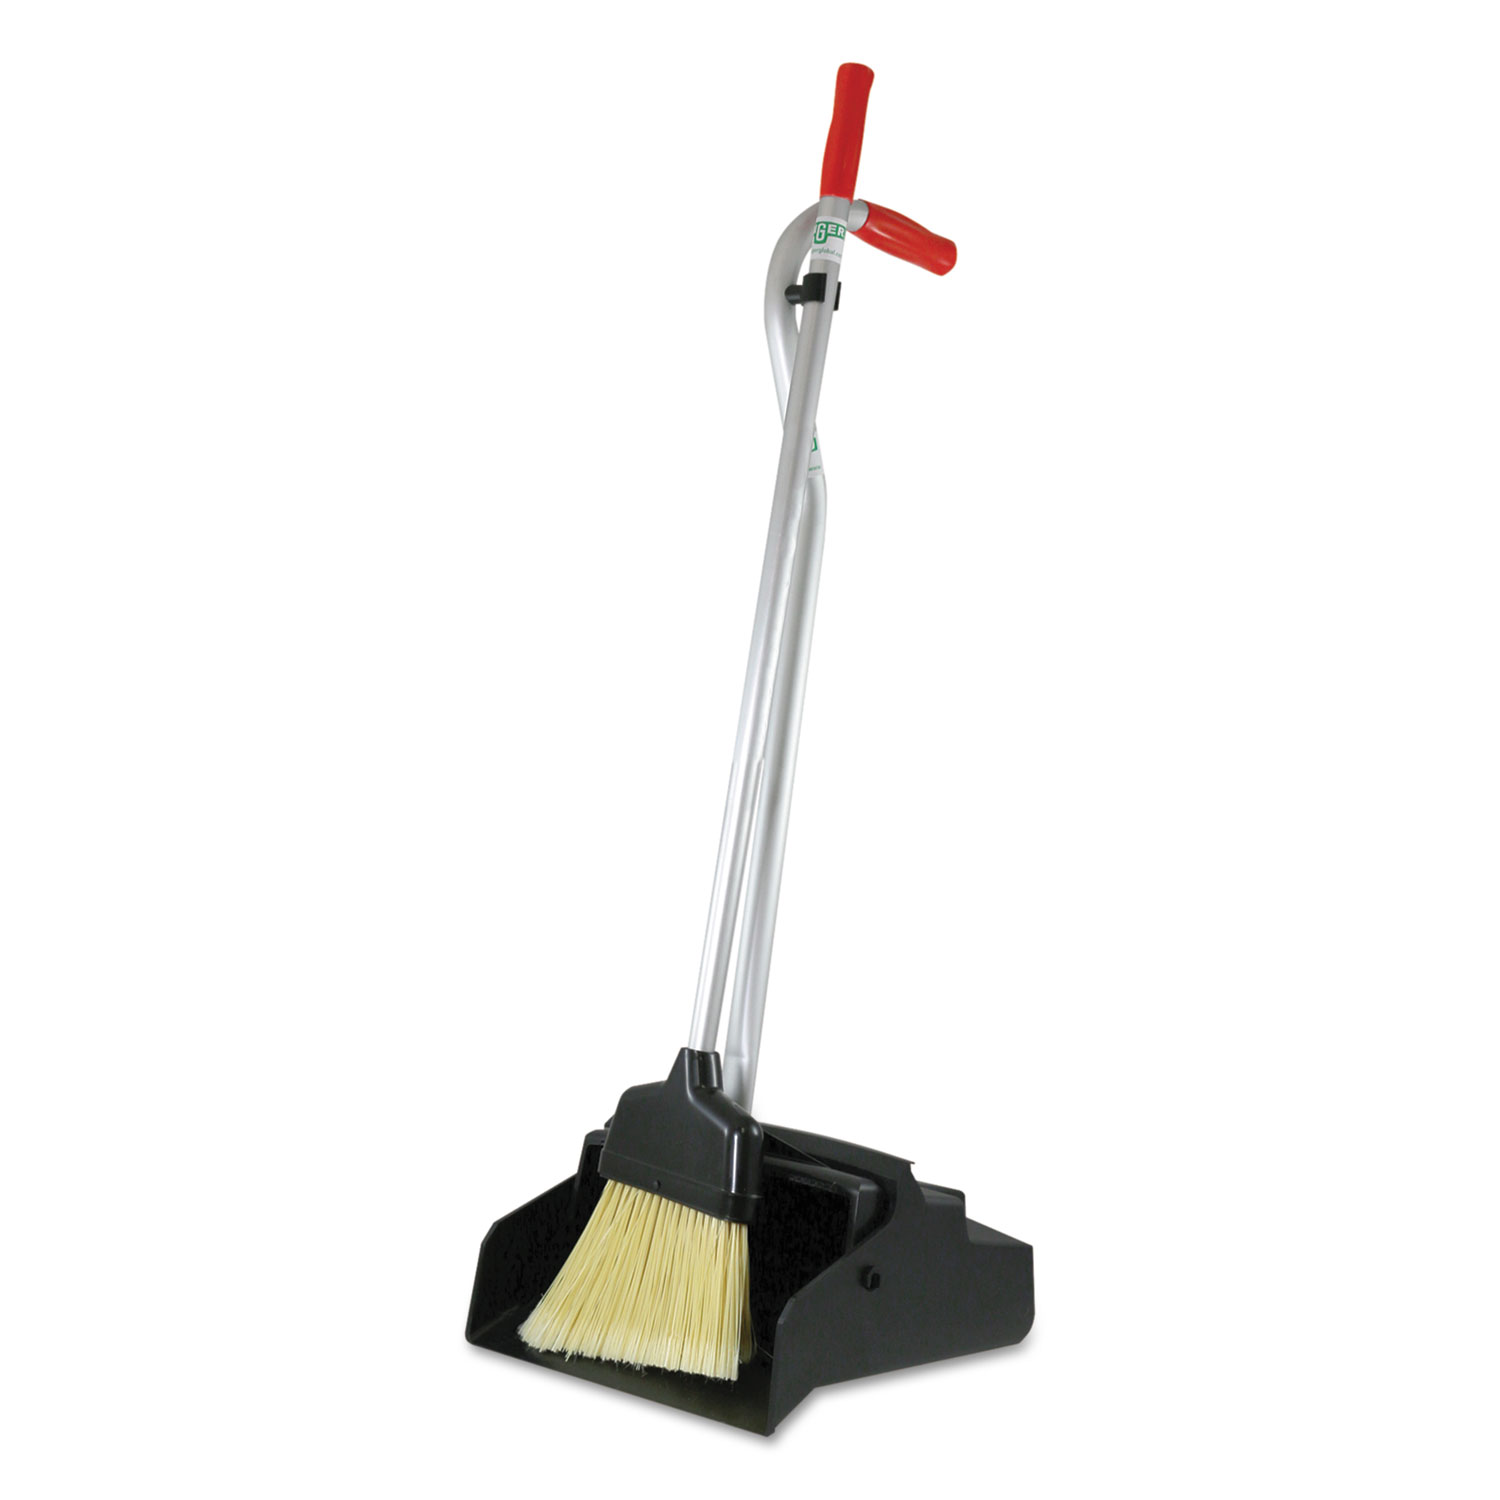  Unger EDPBR Ergo Dustpan With Broom, 12 Wide, Metal w/Vinyl Coated Handle, Red/Silver (UNGEDPBR) 